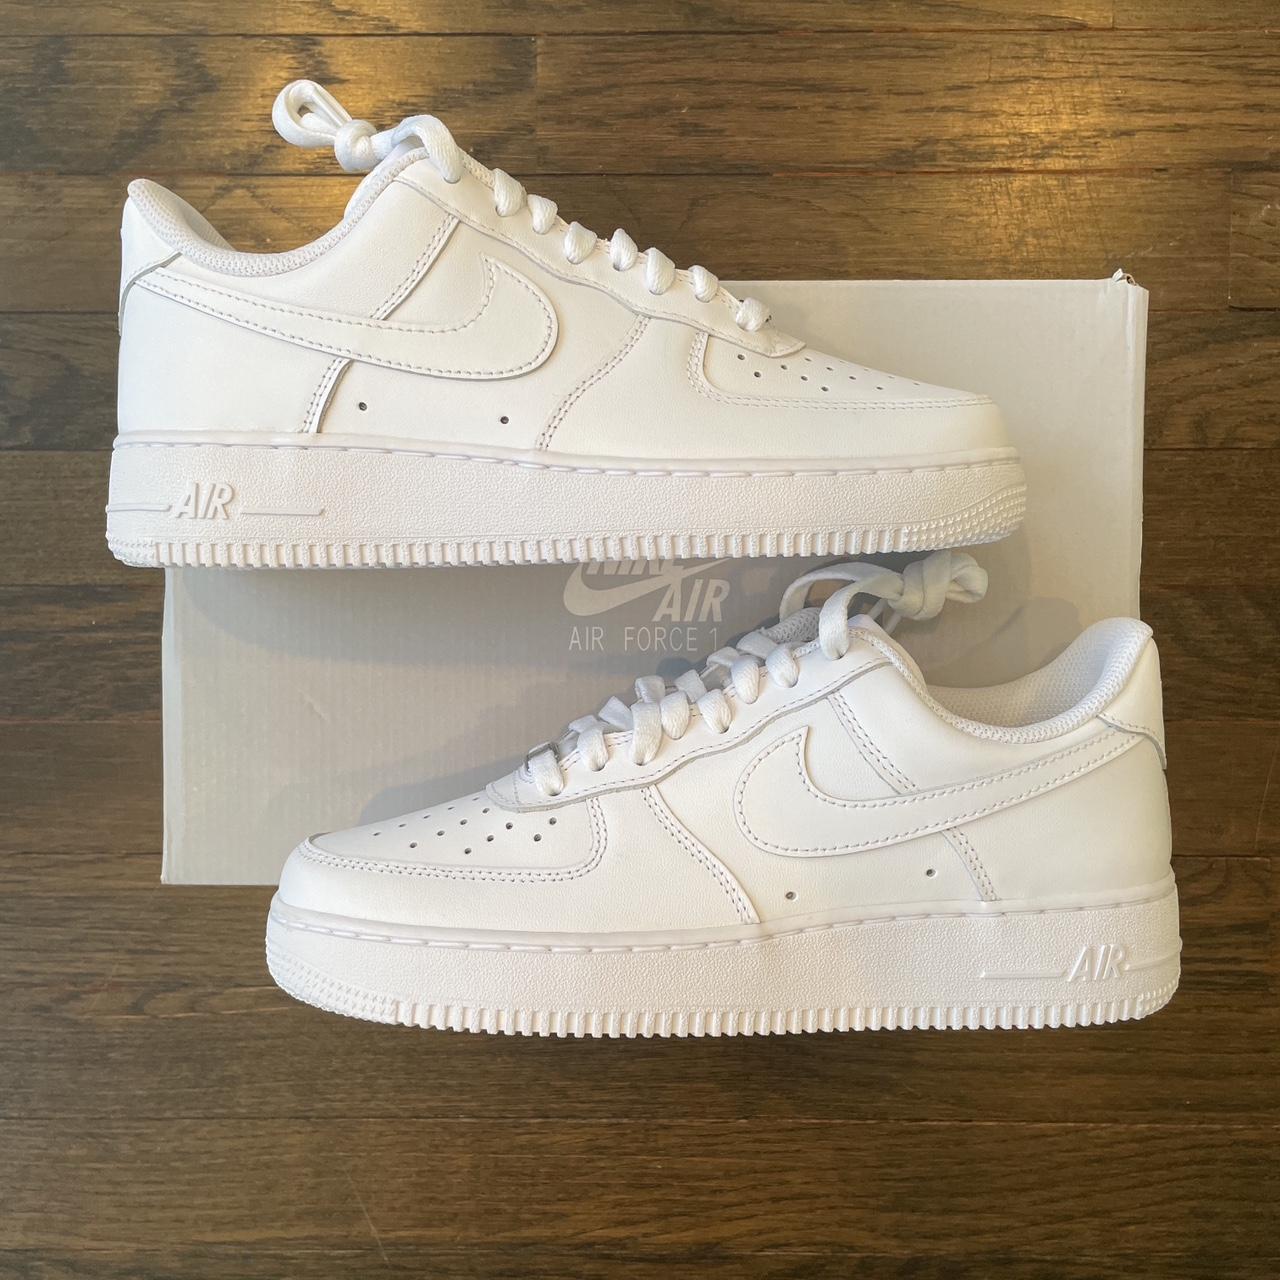 Nike Air Force 1 White New Size 7.5 Open to... - Depop